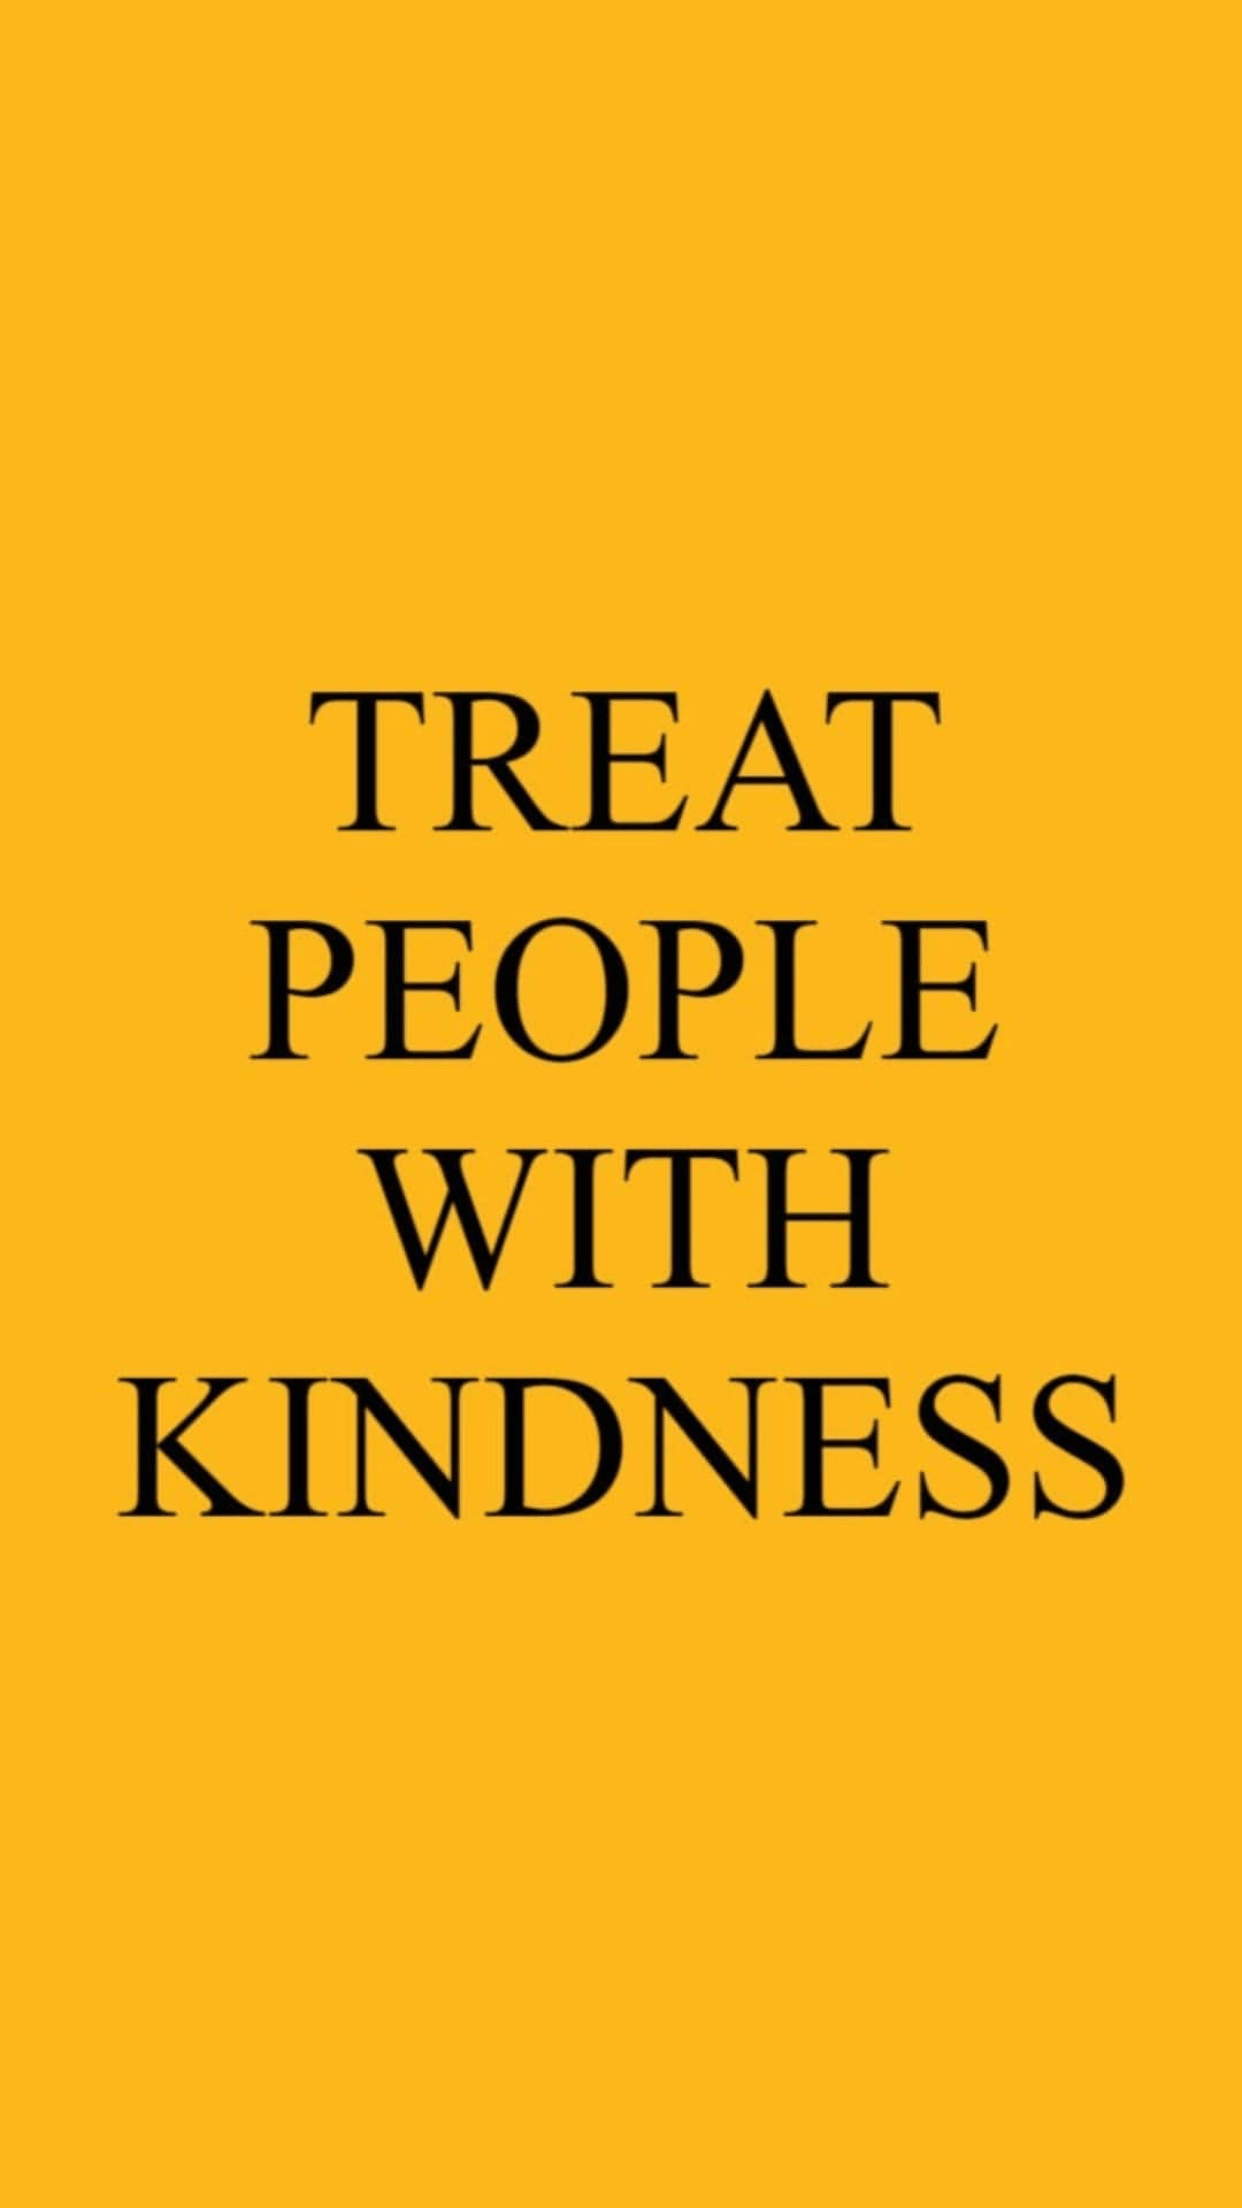 treat people with kindness quote lockscreen  credit to og owner  Treat  people with kindness Quotes lockscreen Cute backgrounds for iphone